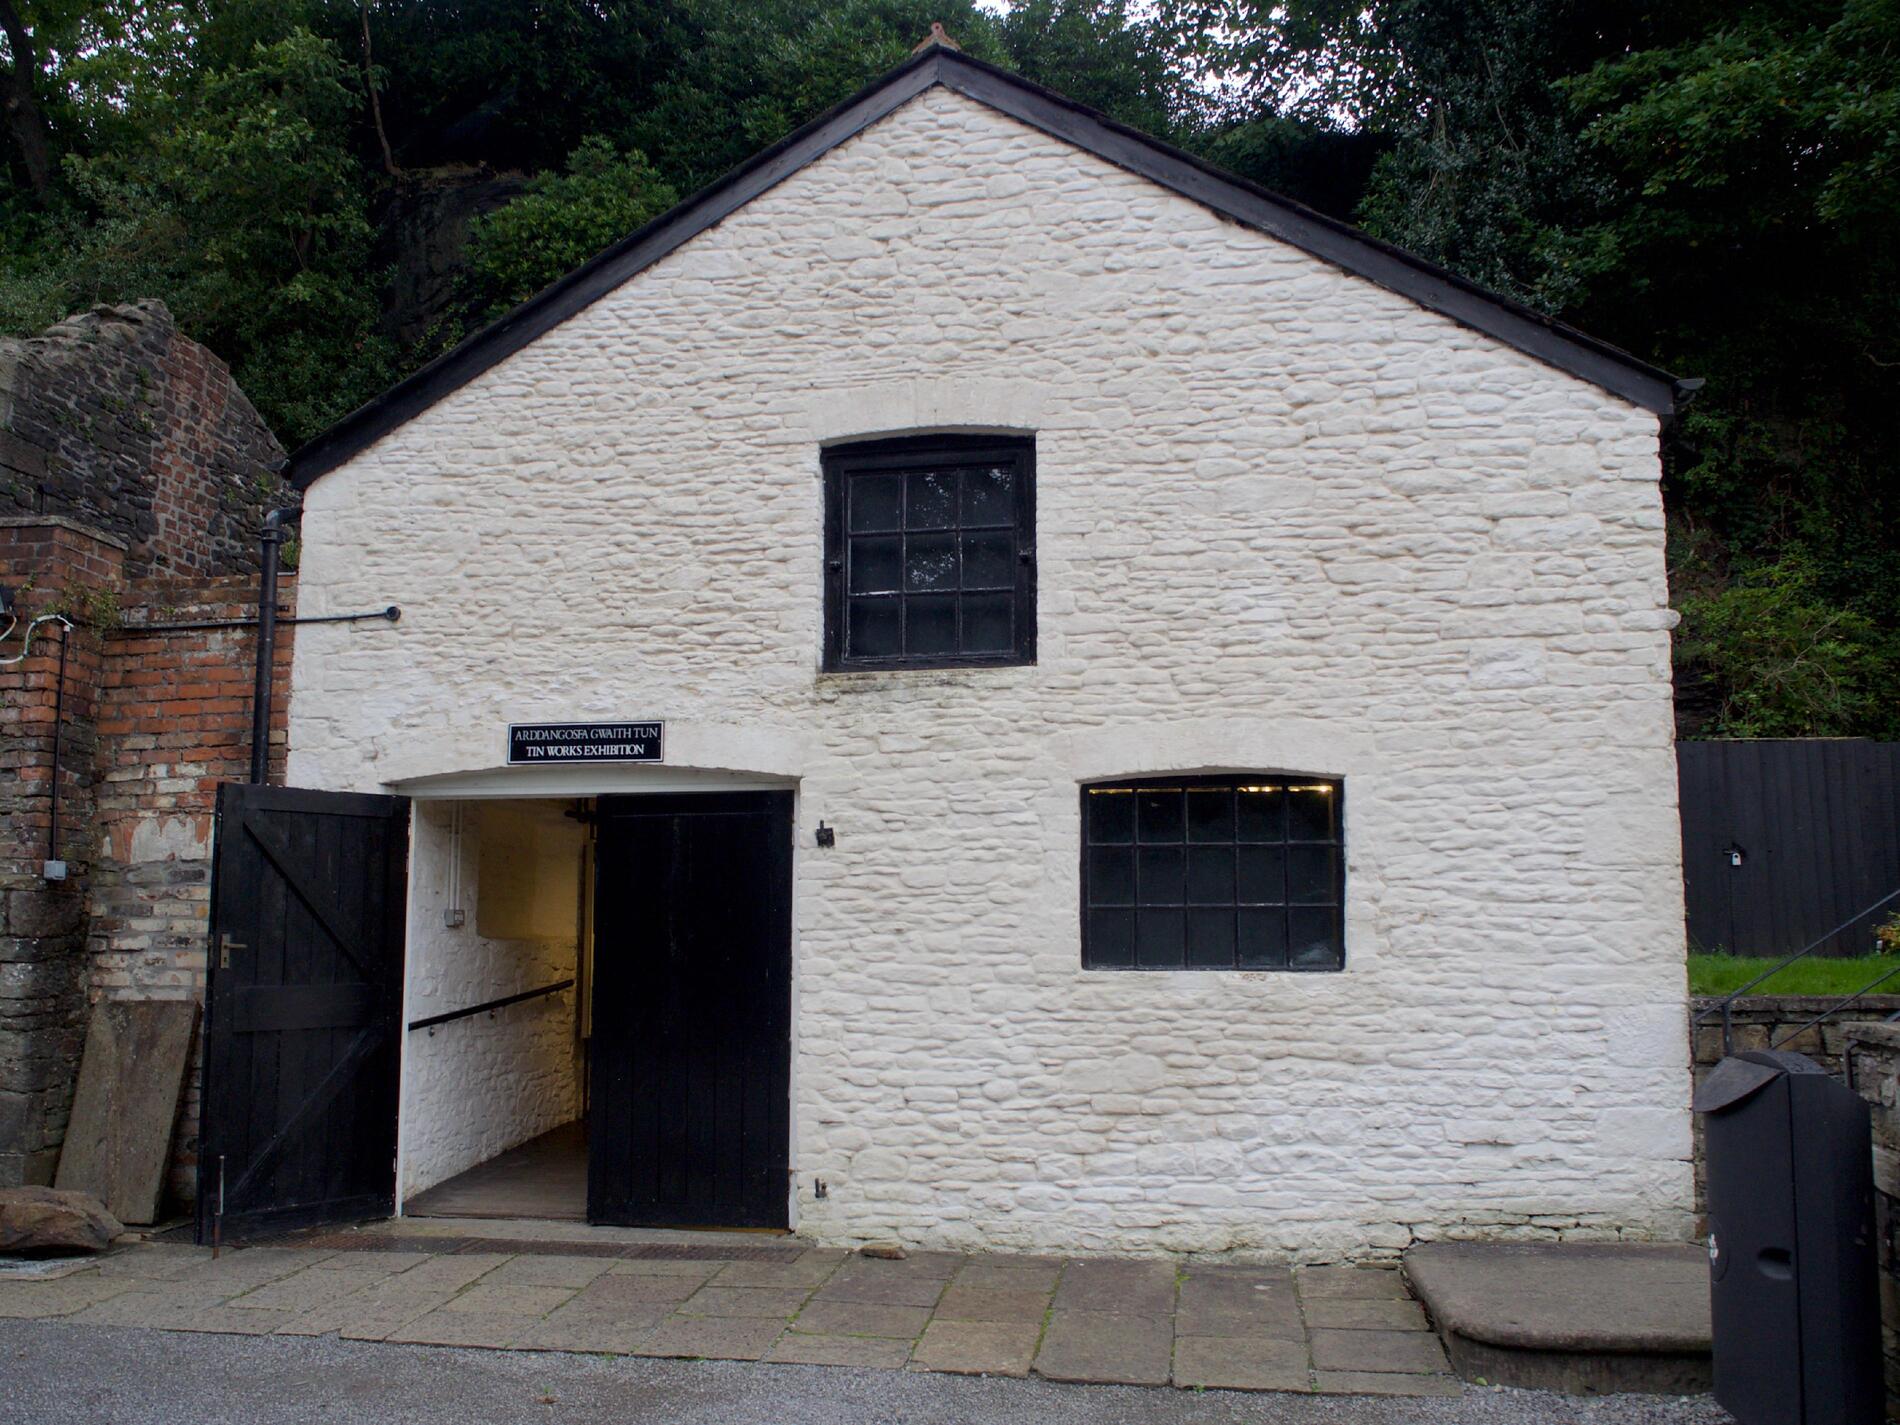 A white building with two windows, black doors, and a small sign reading “Tin Works exhibition”.